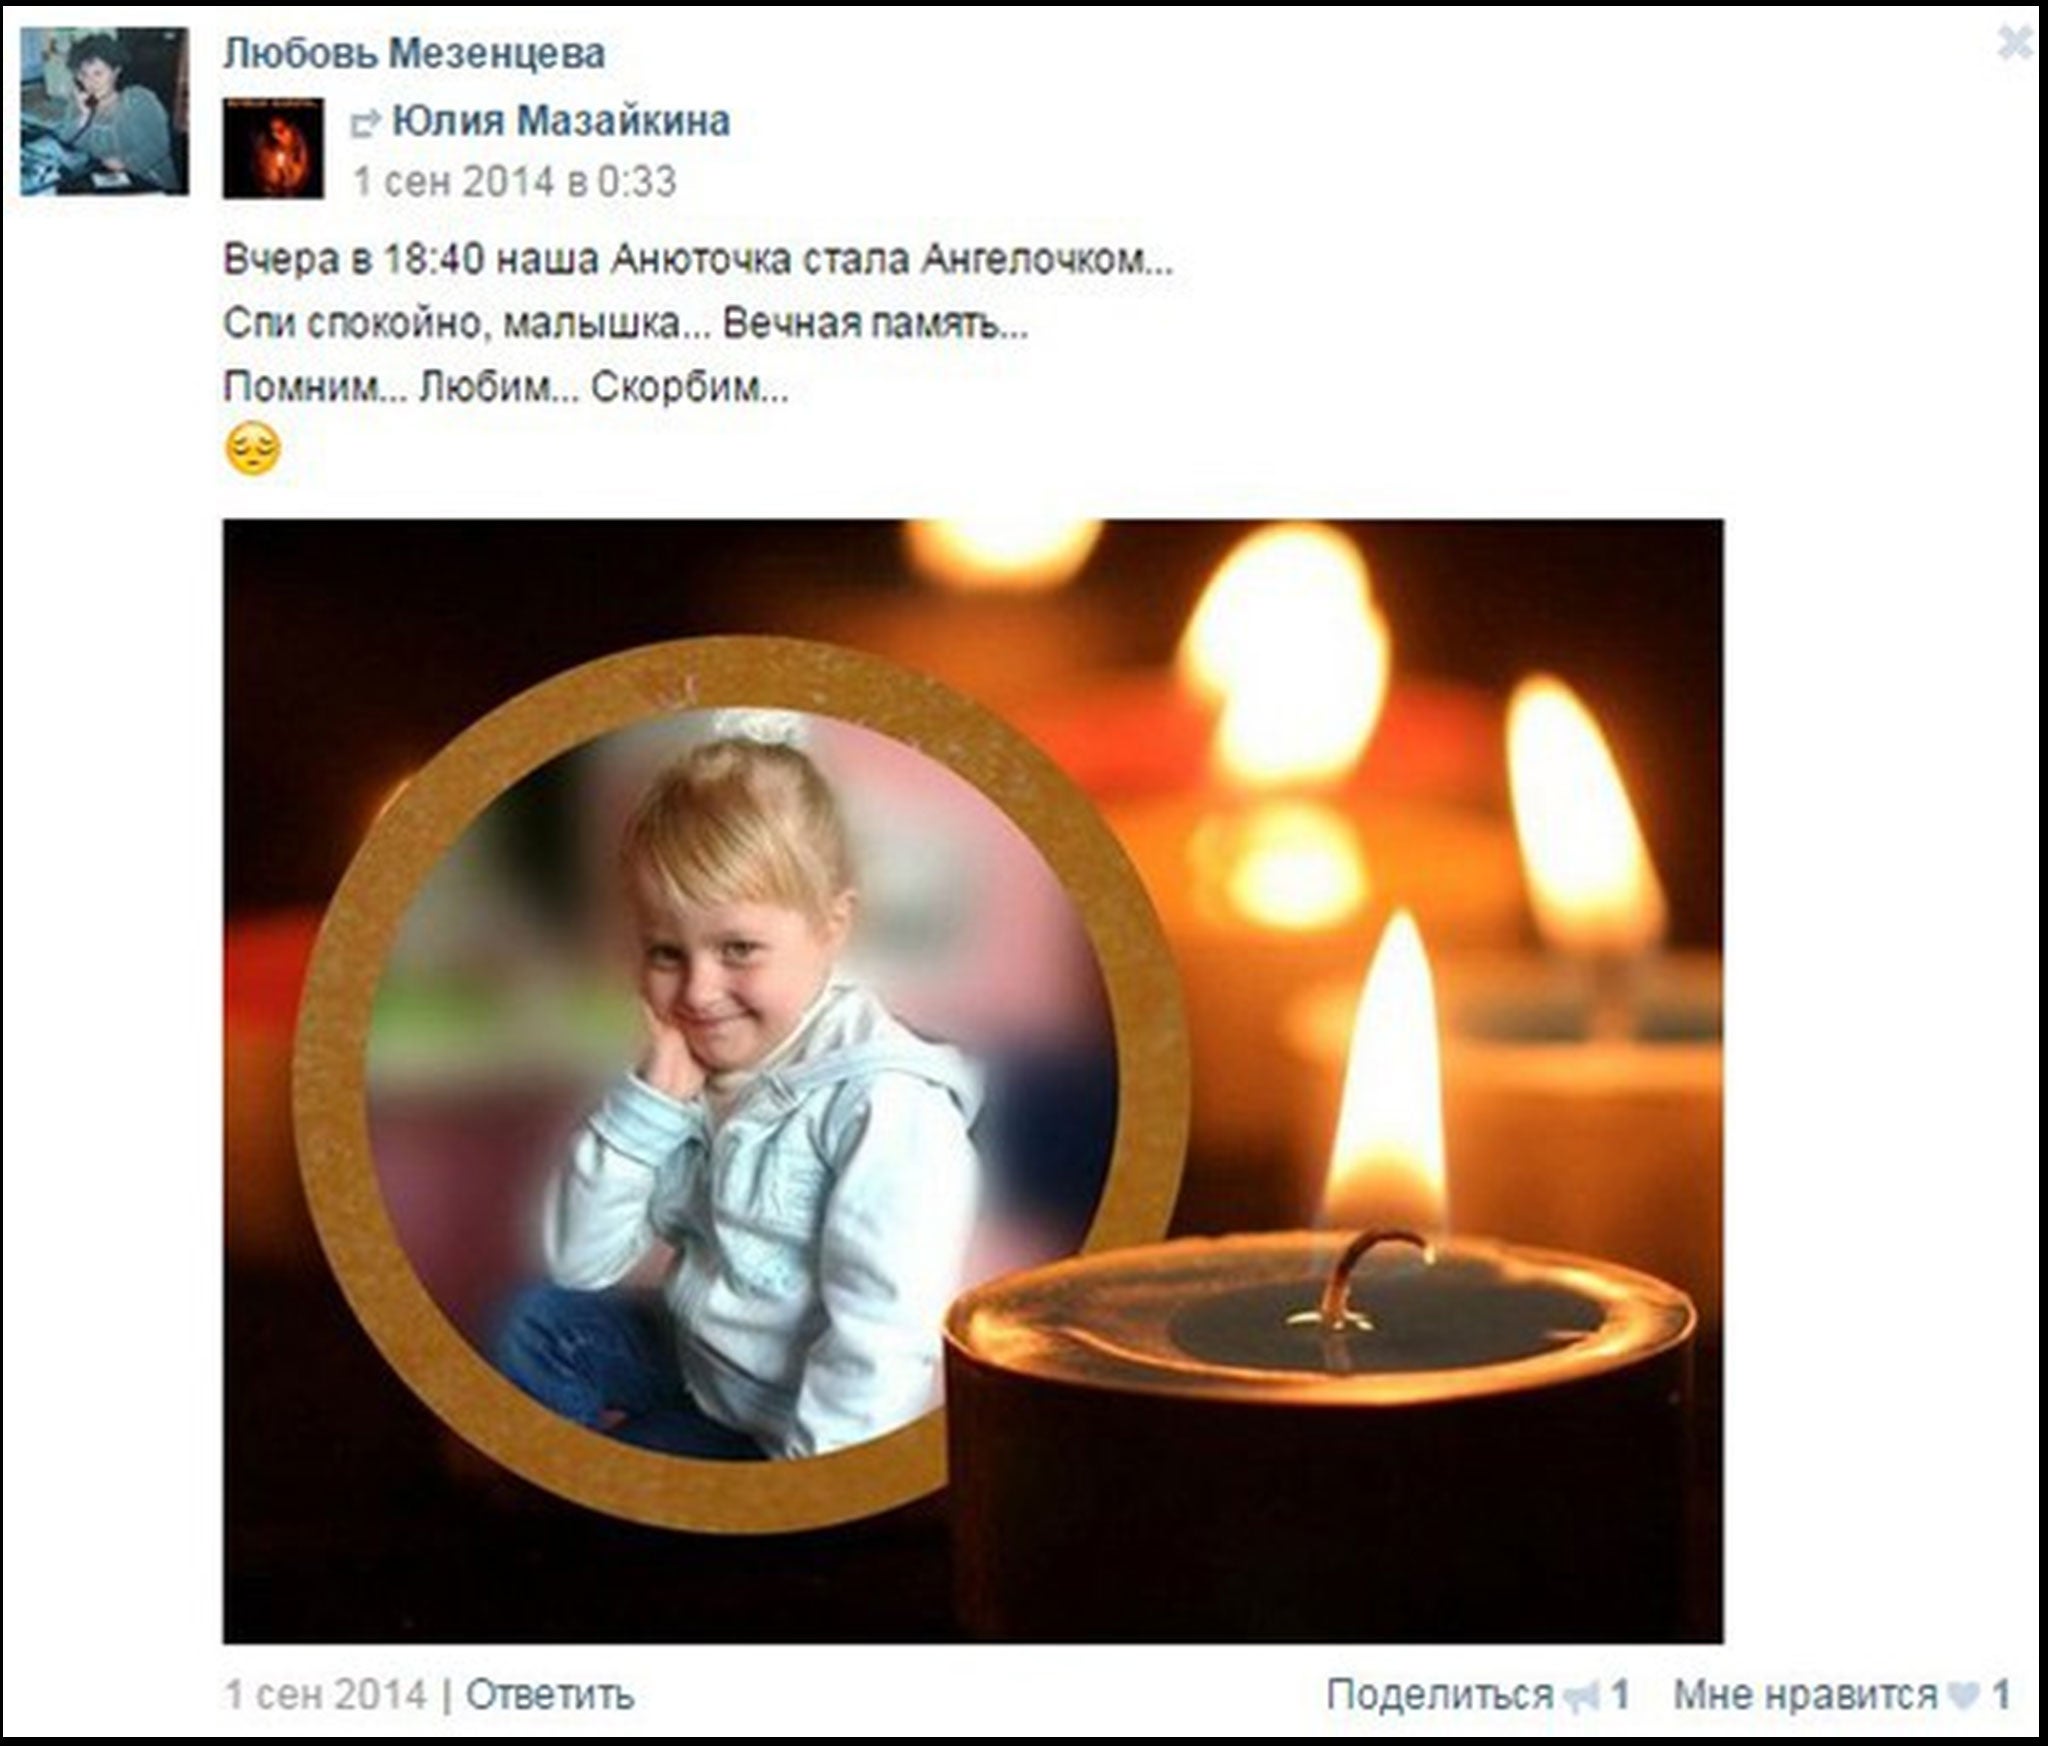 Anya Shevchenko, who died aged five due to Aids denialism